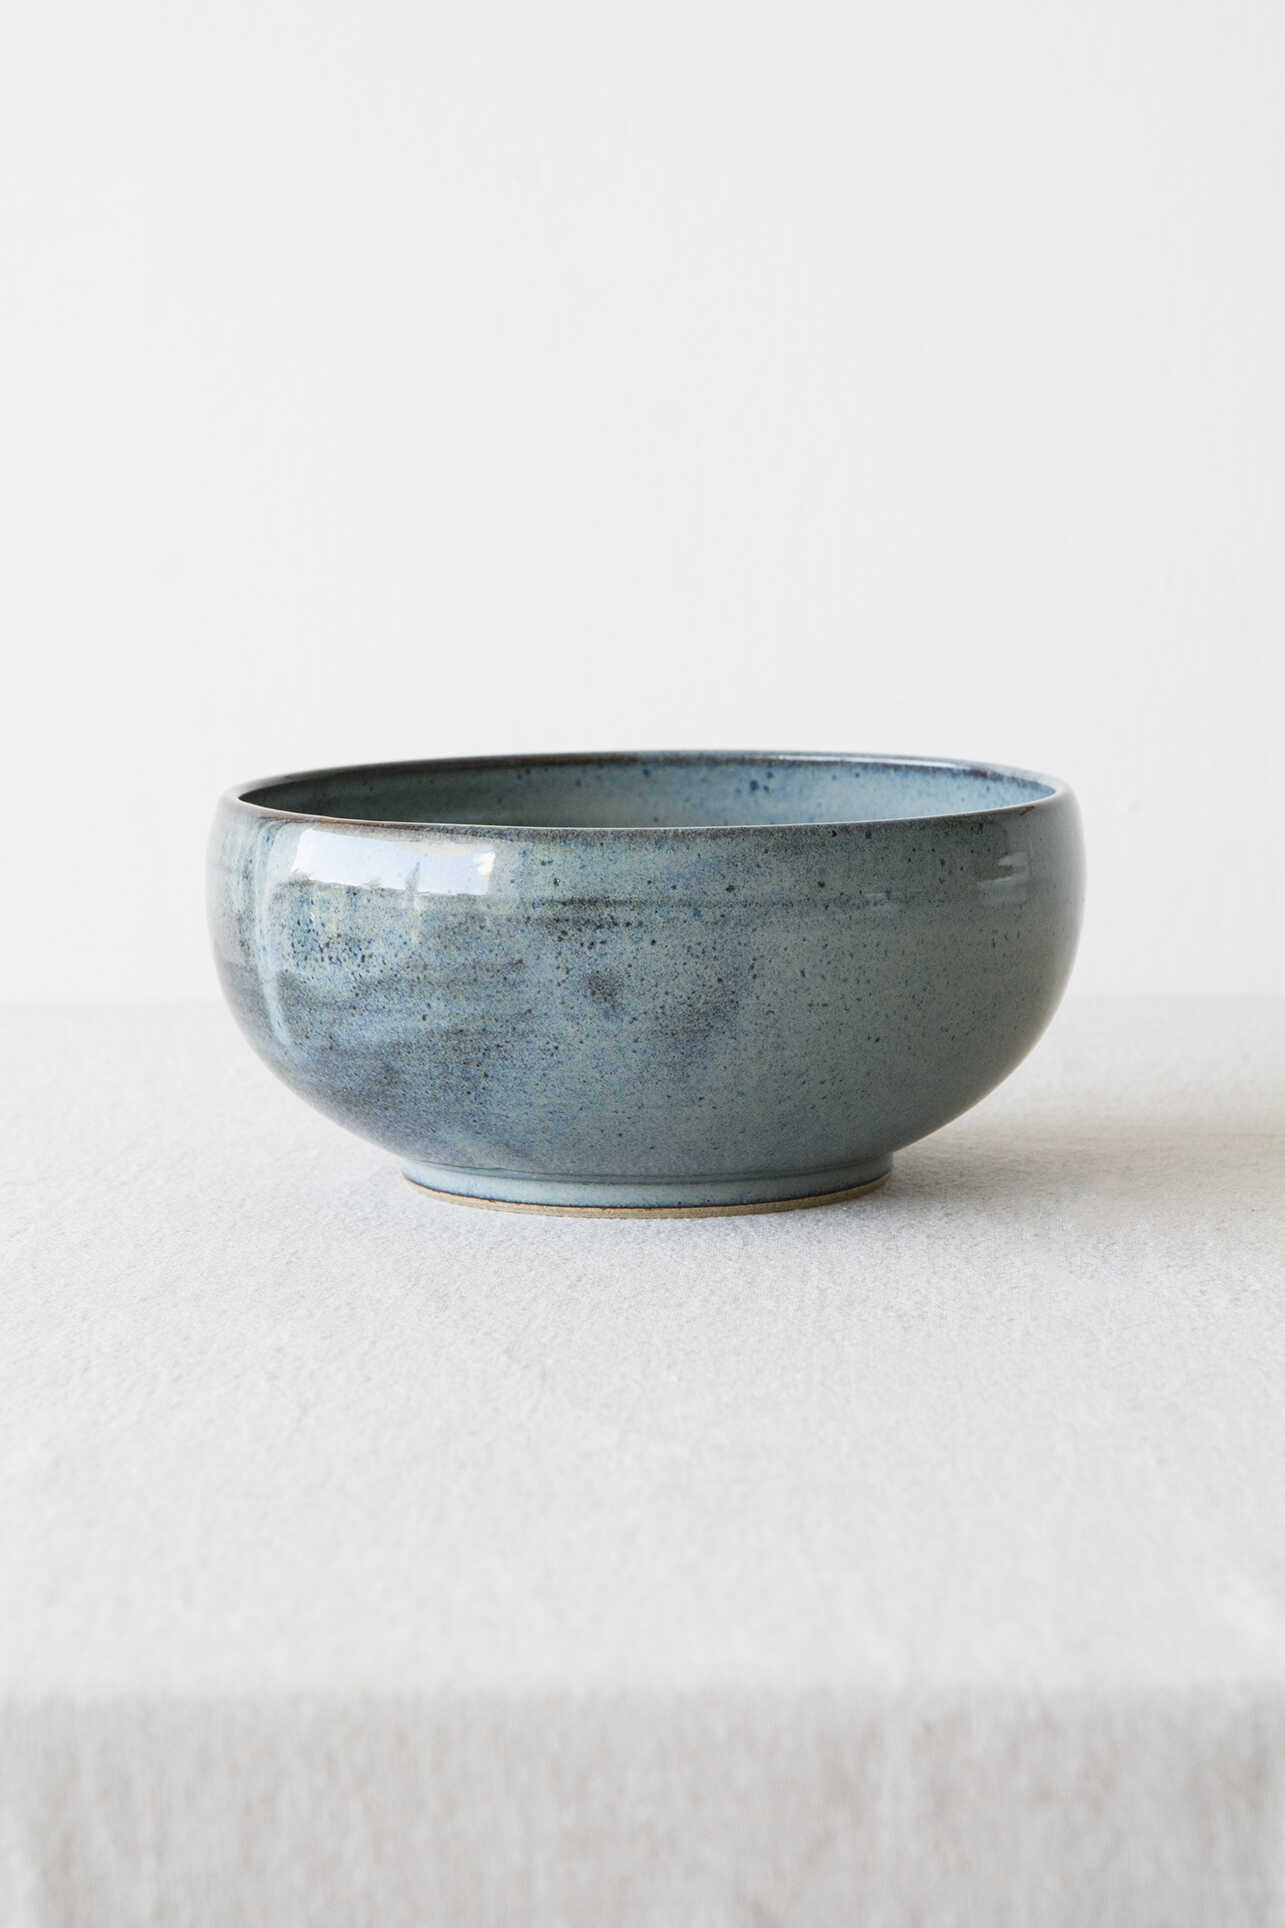 Rustic Ceramic Serving Bowl - Mad About Pottery- Bowl